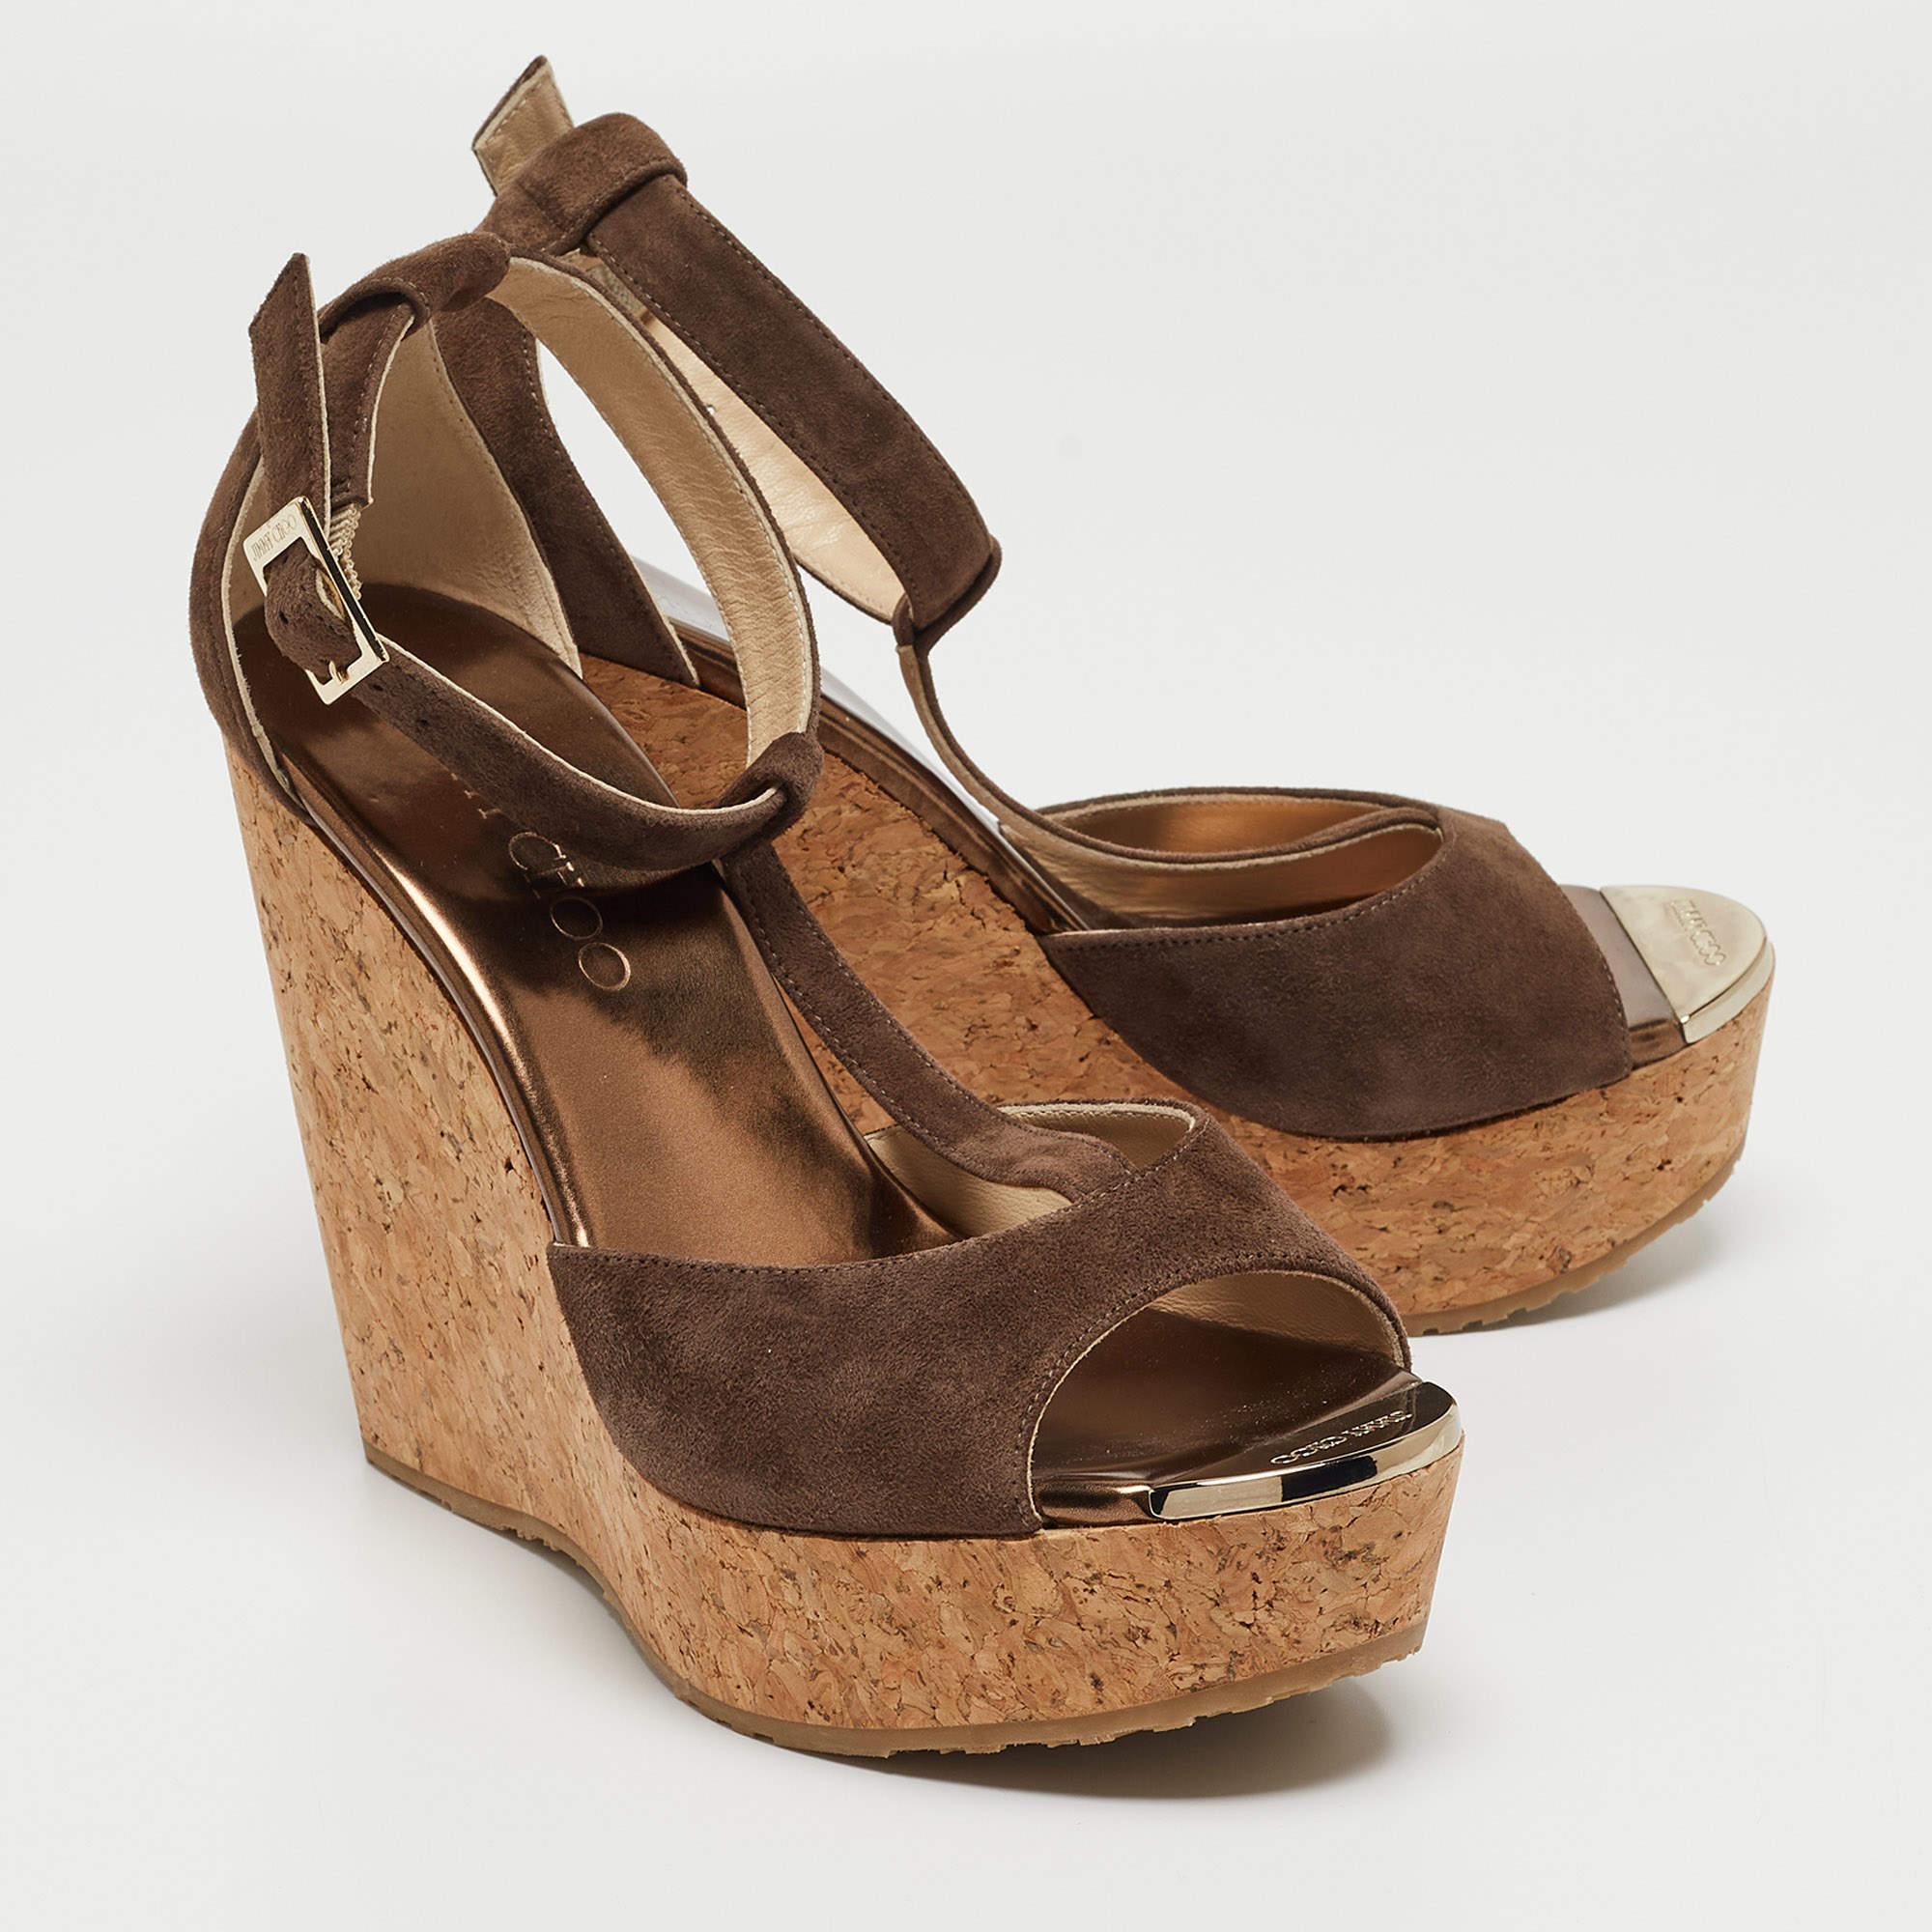 Women's Jimmy Choo Brown Suede Wedge Sandals Size 37